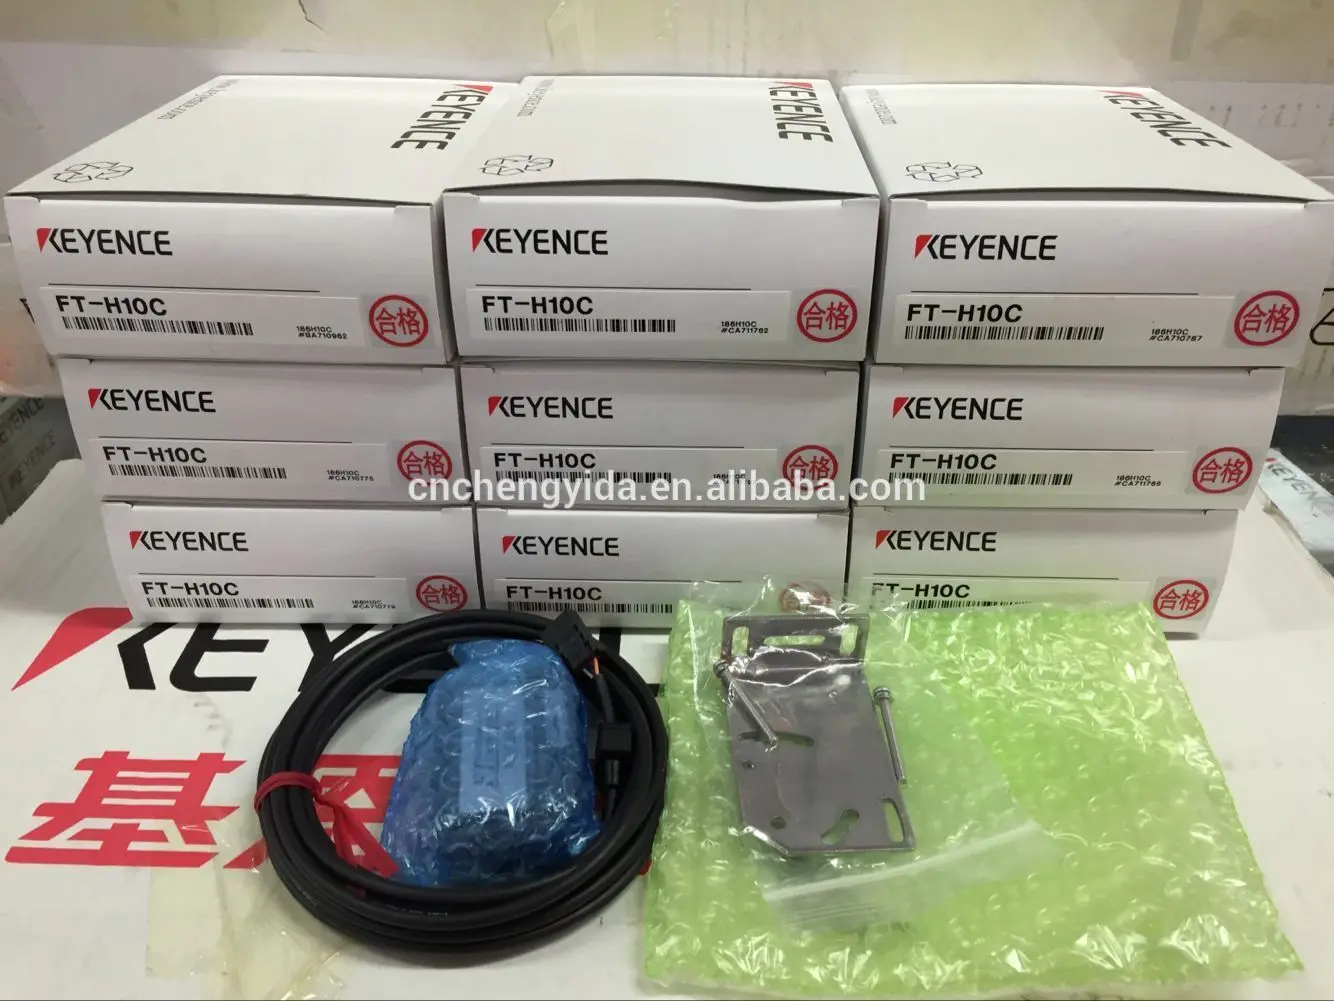 Details about   Keyence FT-H10 Year 2017 Thermo Sensor as photo DHLtoUS. Tested sn:random 